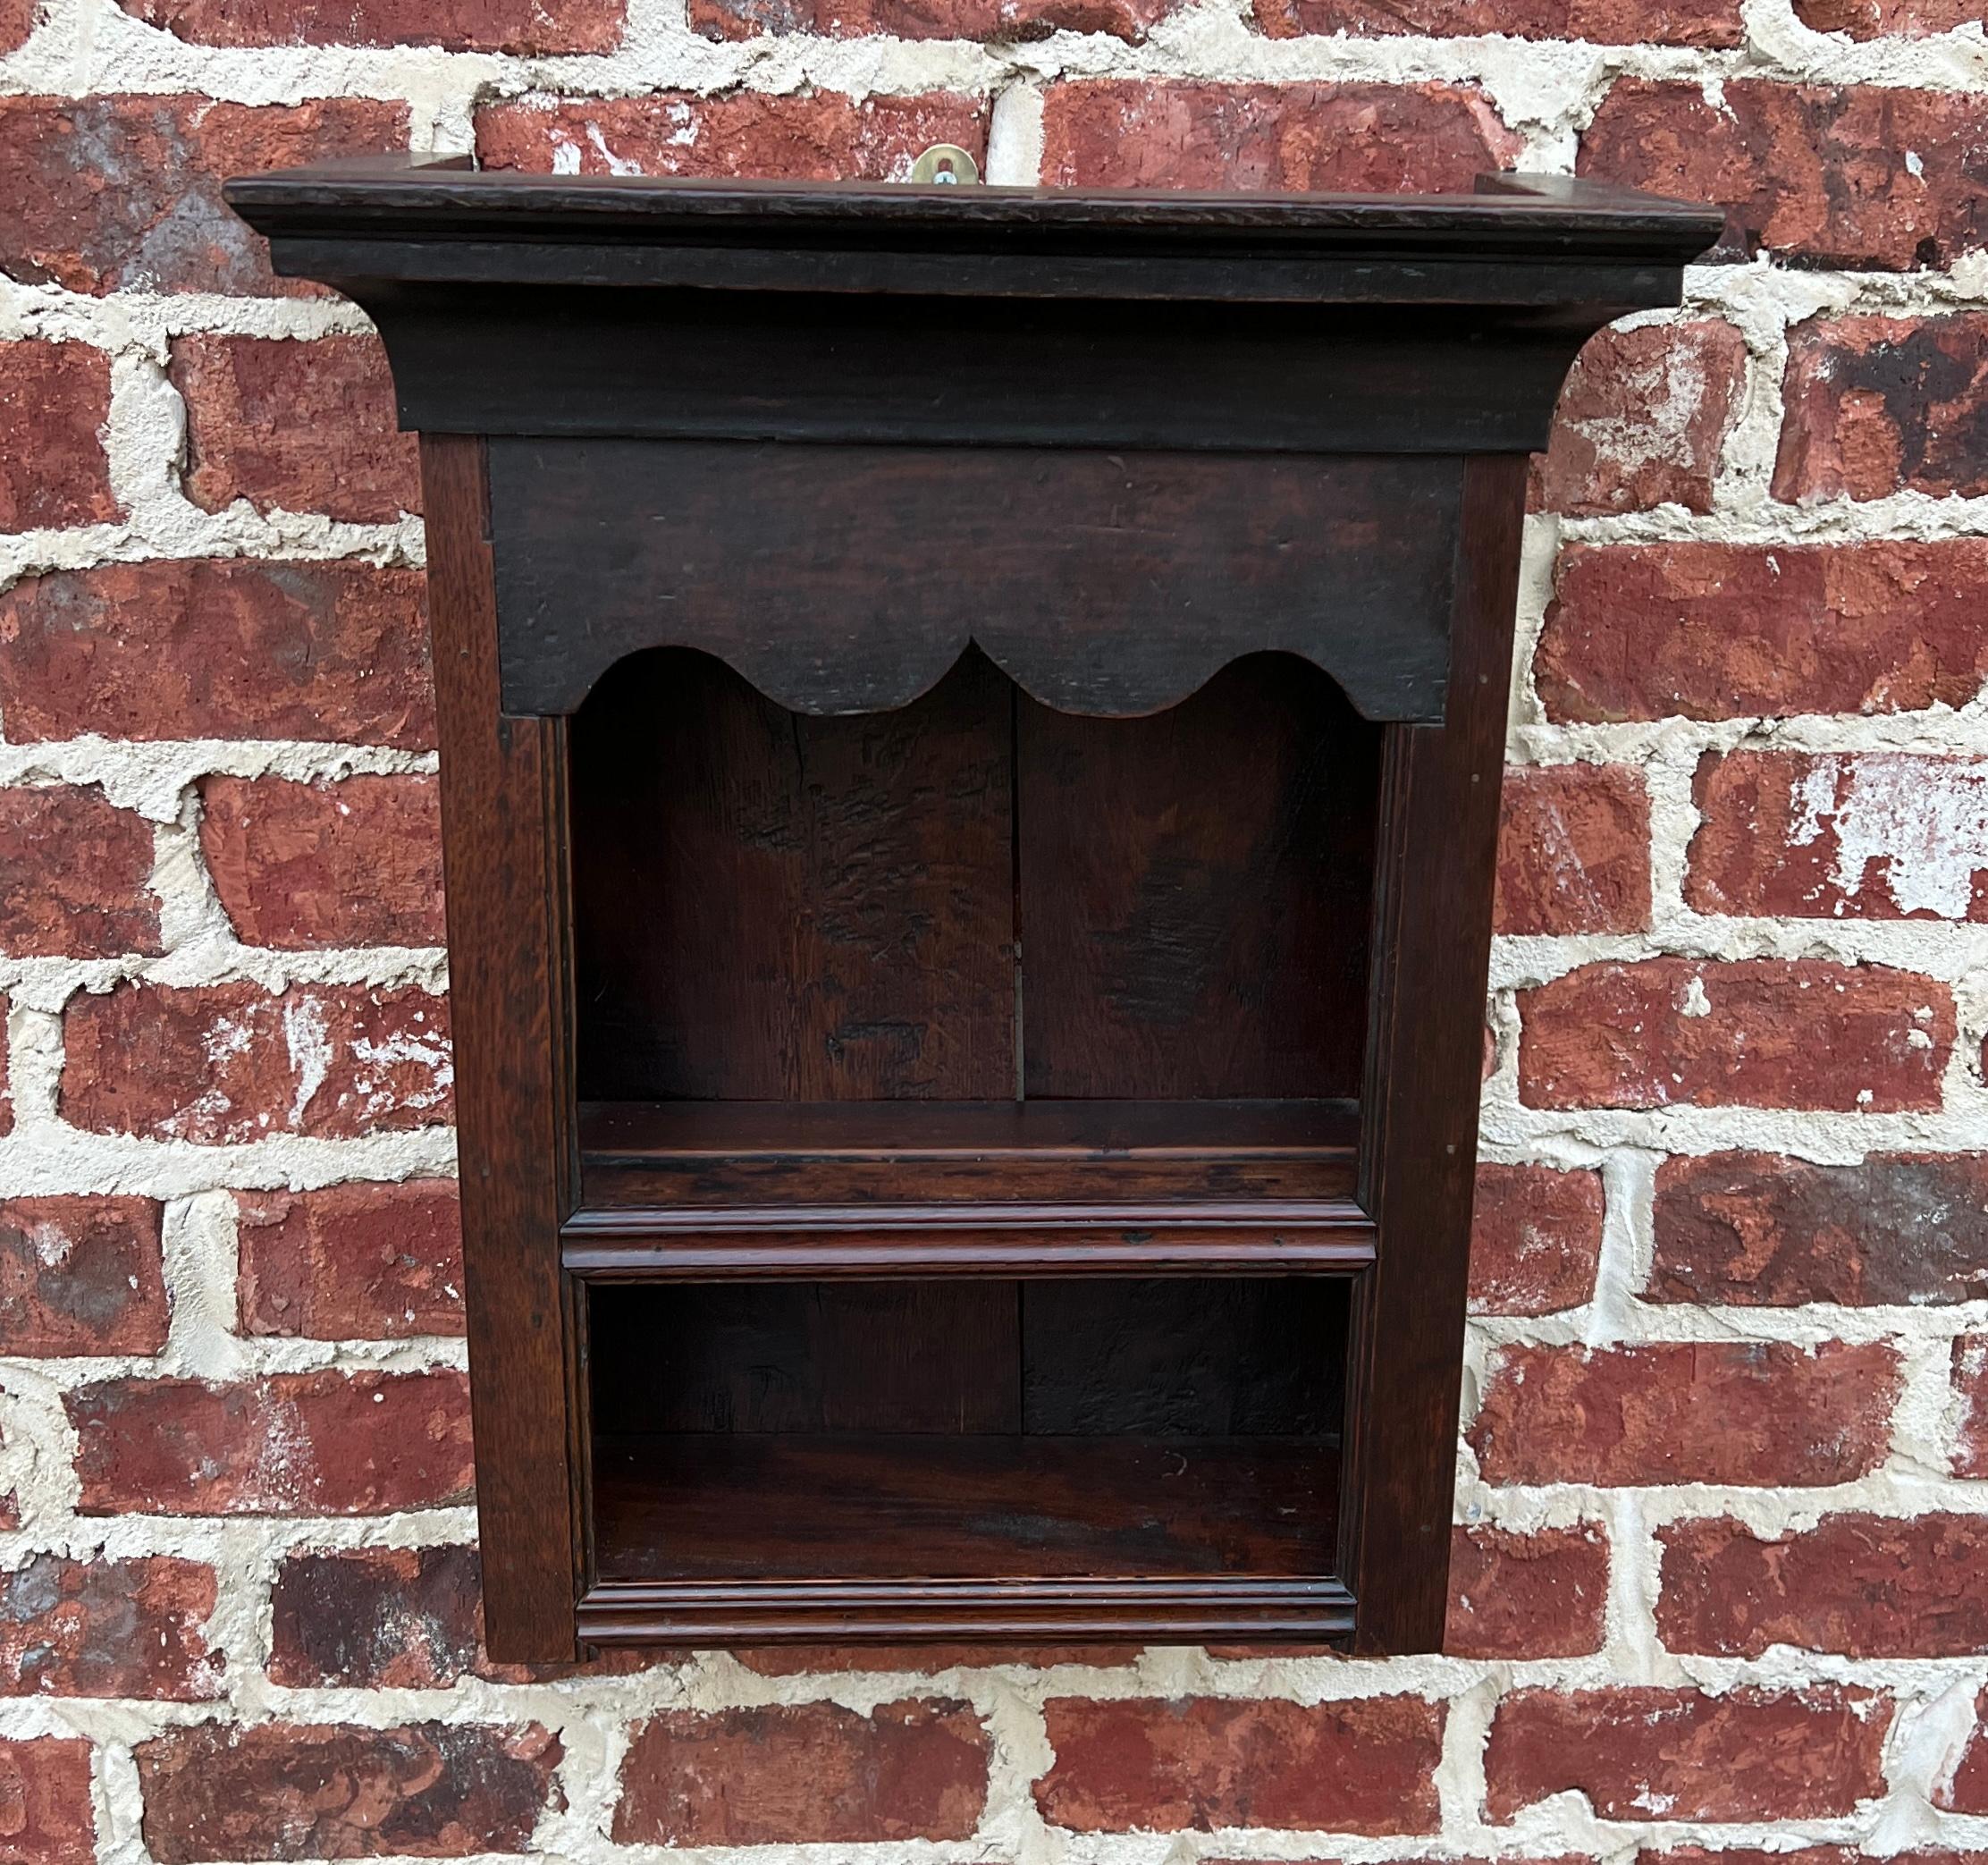 18th Century Antique English Wall Shelf Hanging Wall Decor Small Bookcase Carved Oak 18th C